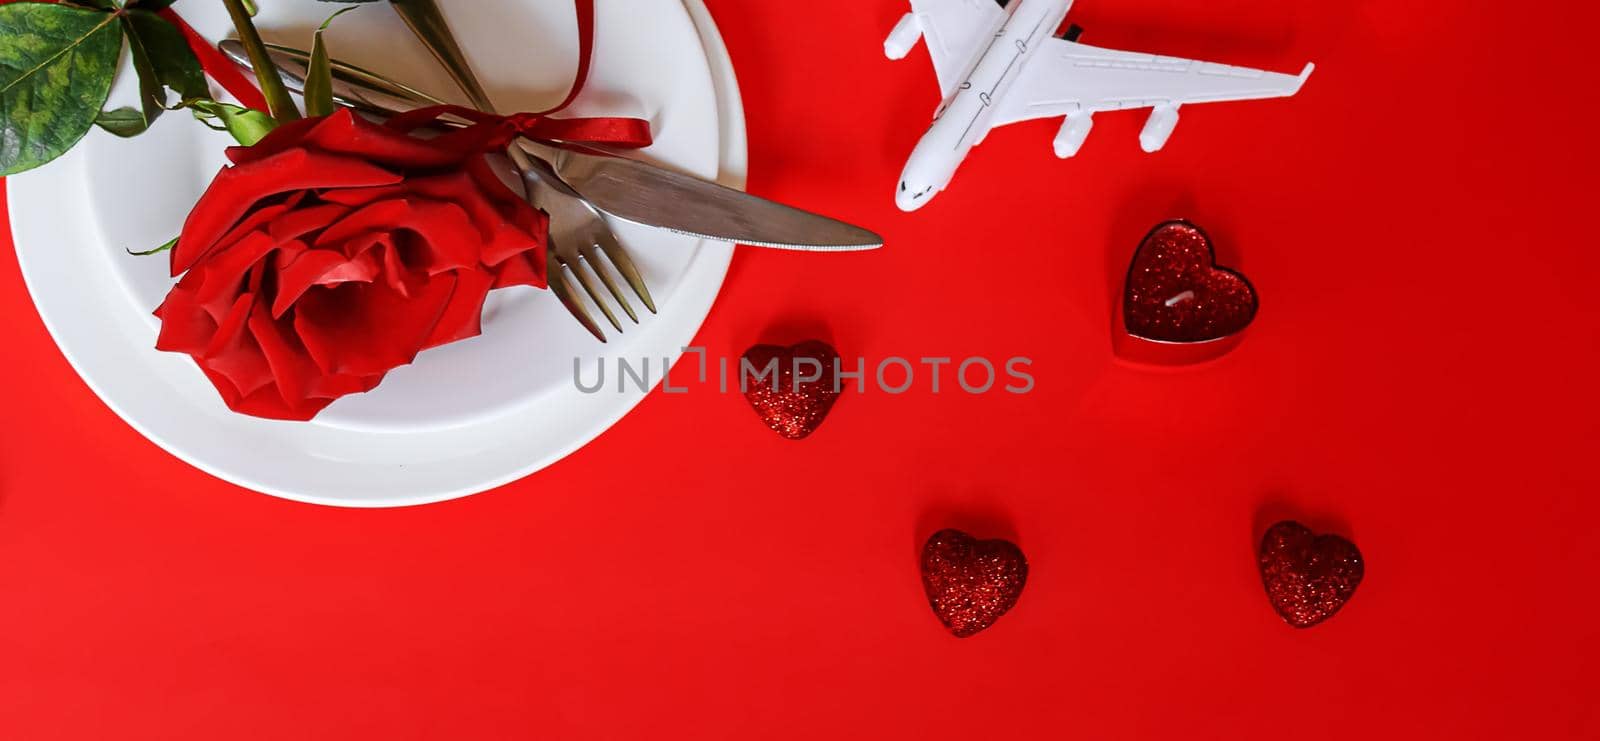 Valentine's Day. A beautiful gift trip. Selective focus. by mila1784